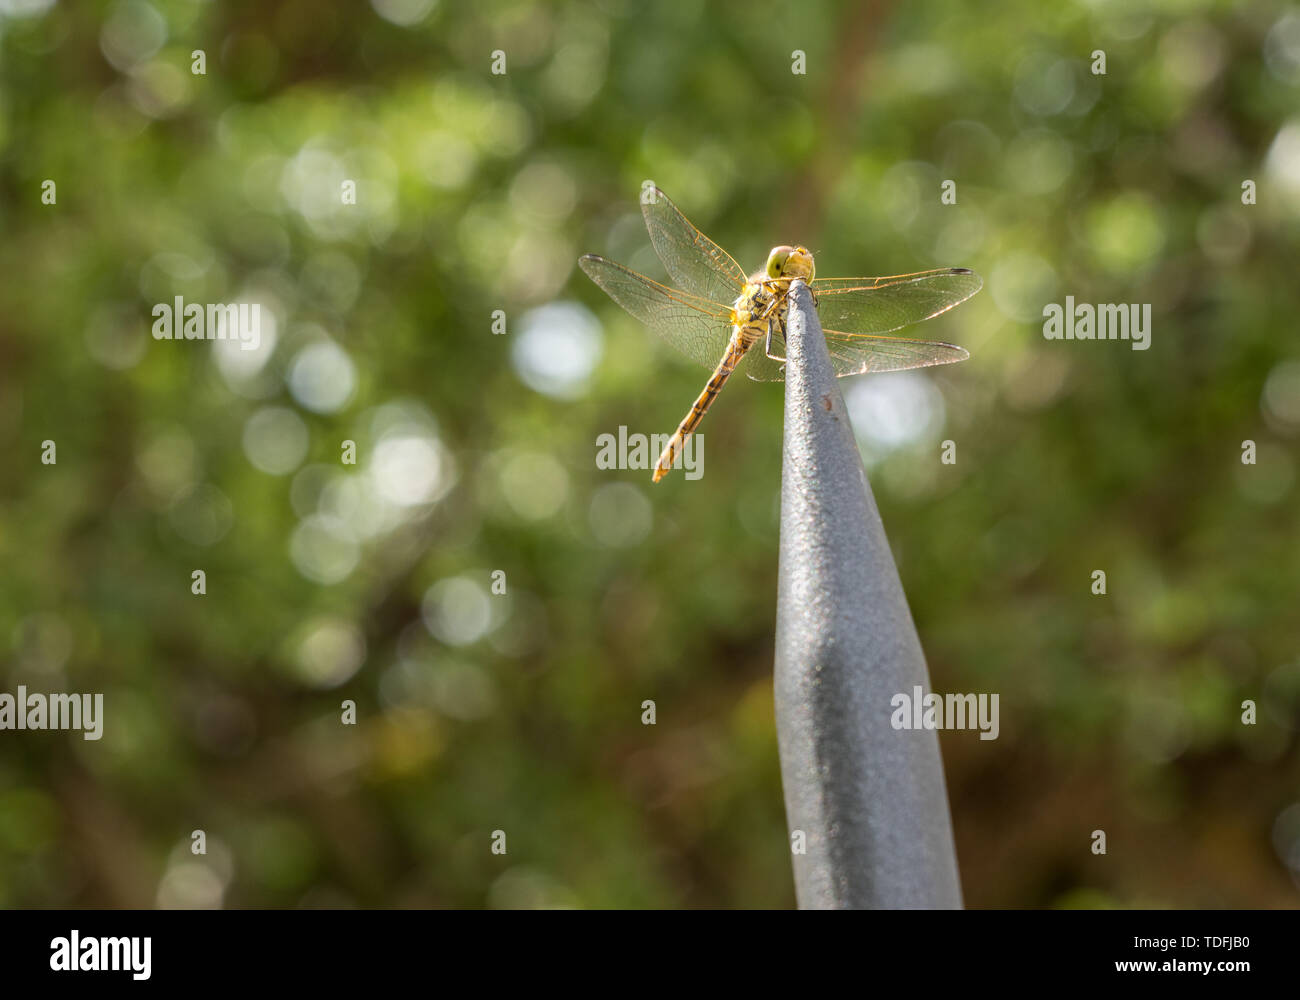 Dragon fly in macro on top of steel spike of fencing Stock Photo